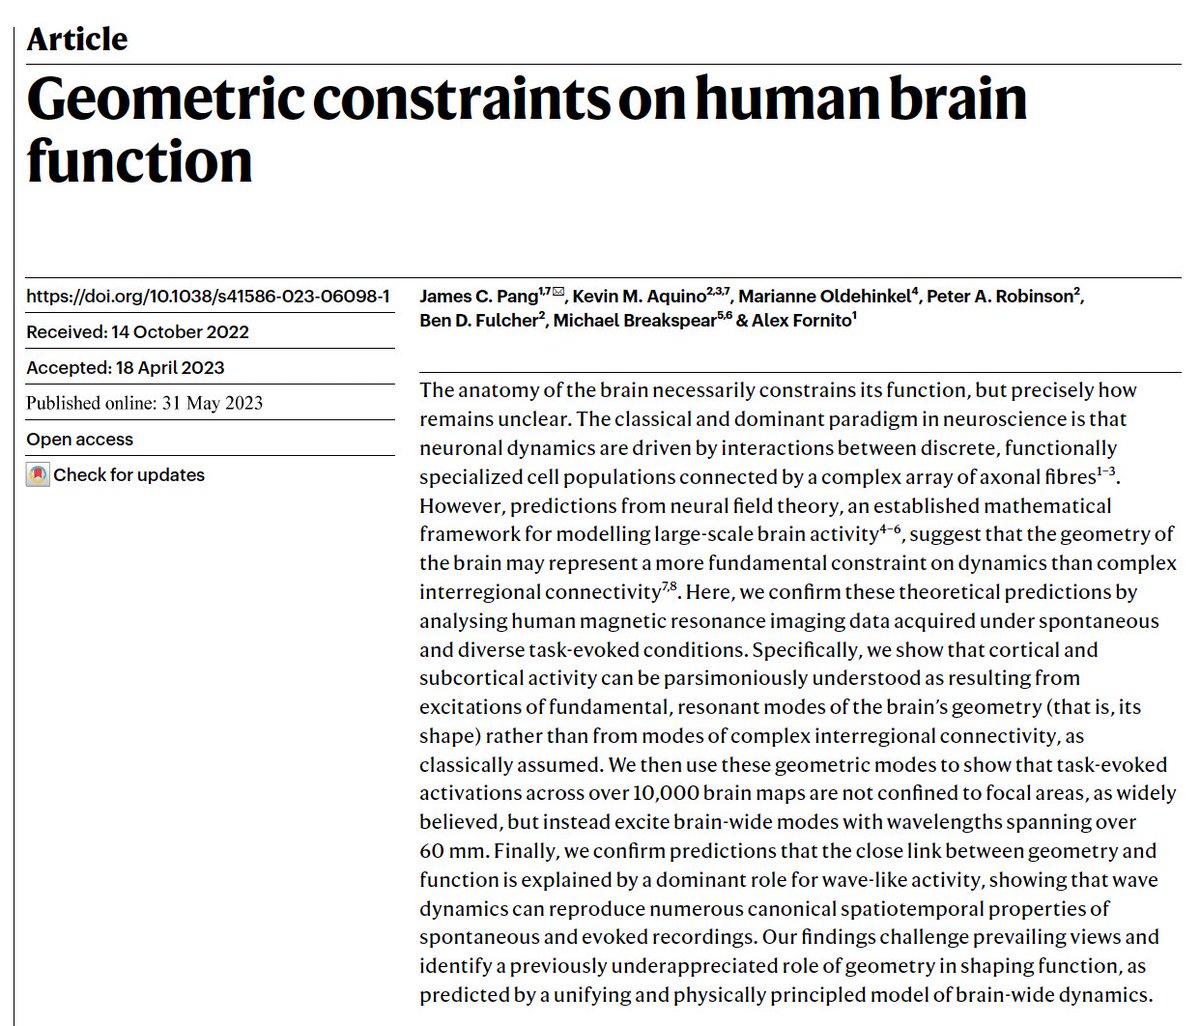 Our latest –– 'Geometric constraints on human brain function' –– led by @jchrispang & @Kevin_M_Aquino w/ @bendfulcher @DrBreaky P Robinson and @M_Oldehinkel now out in @Nature. Detailed thread on preprint below. Huge congrats to a wonderful team! @NSB_Lab @turnerinstitute